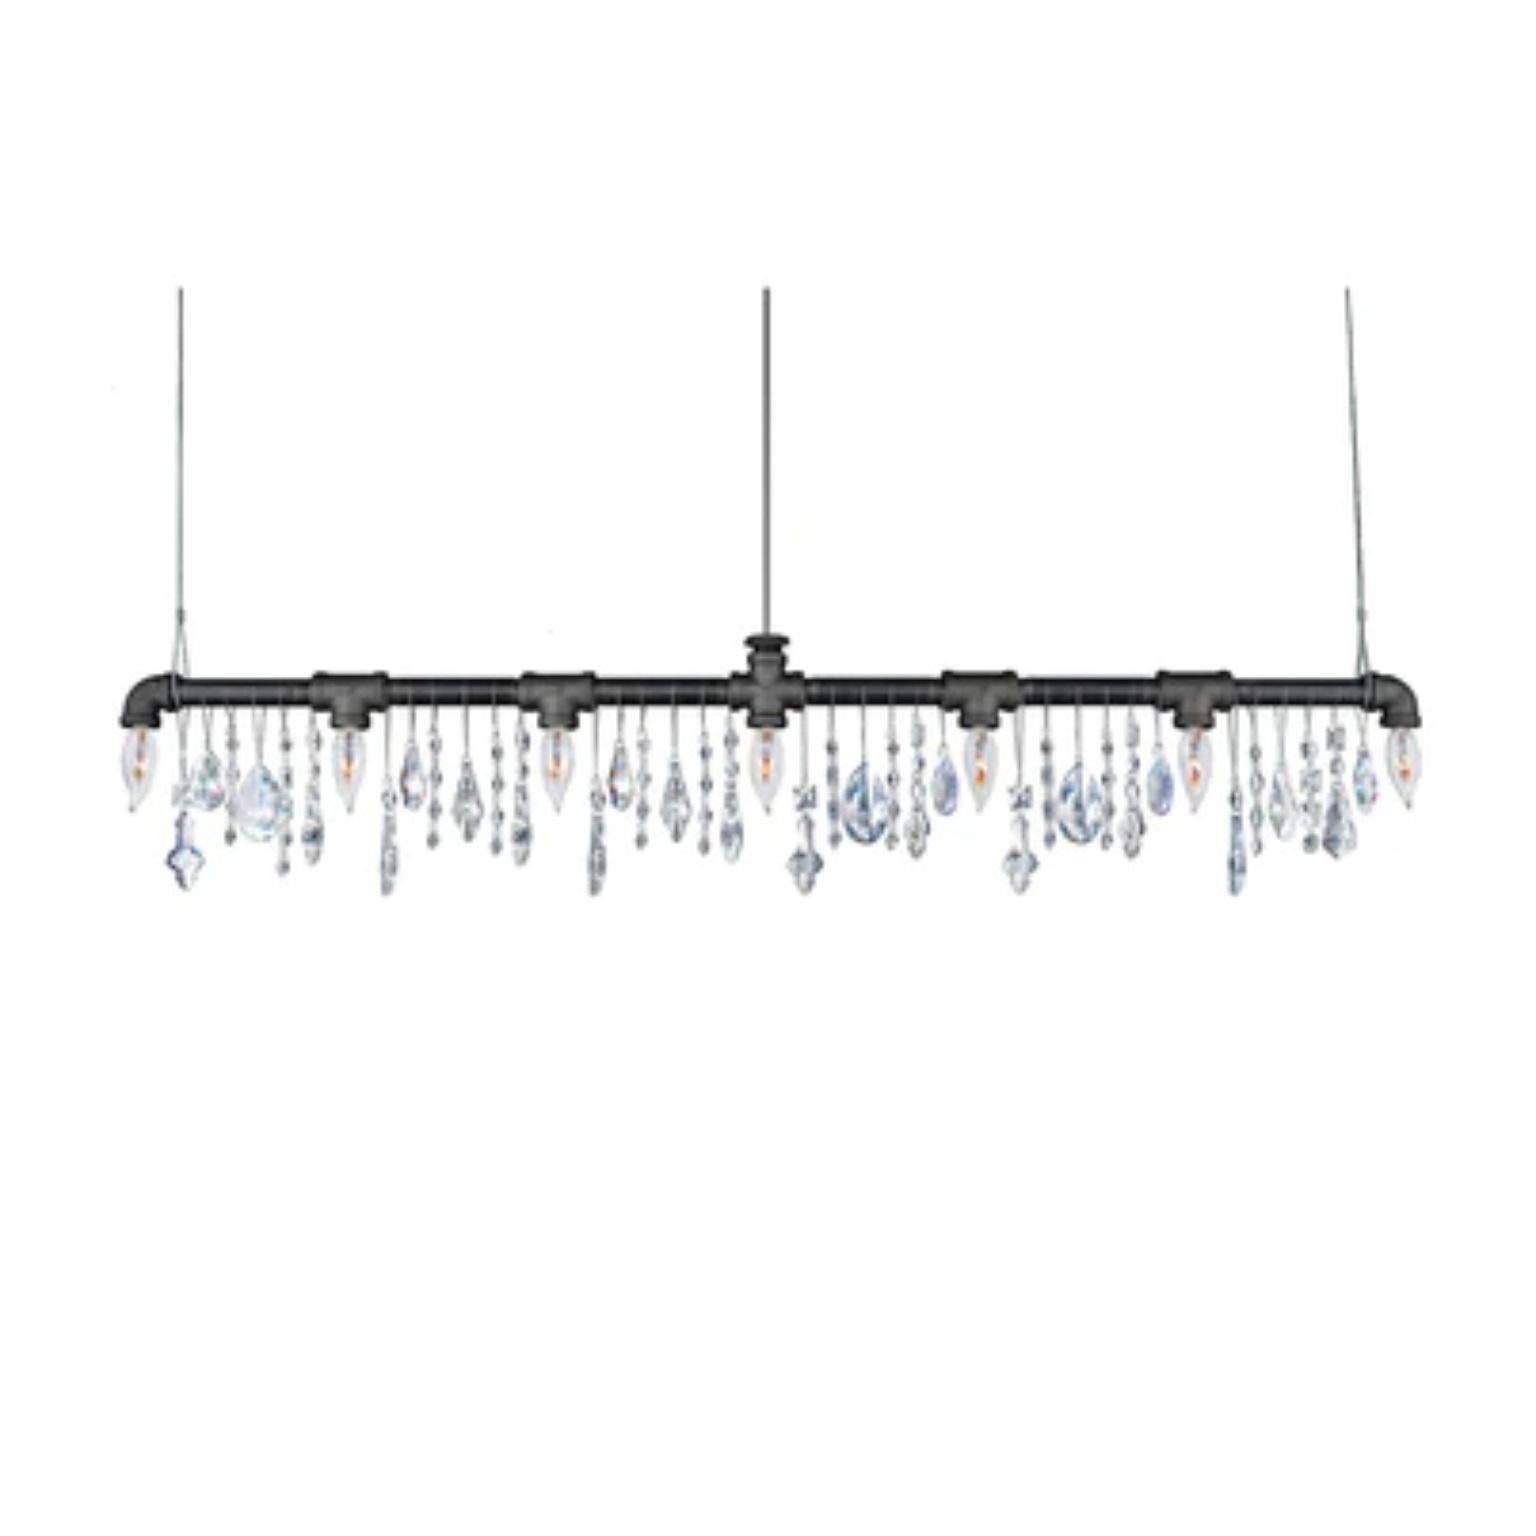 Tribeca bar chandelier linear suspension 42 by Michael McHale.
Dimensions: D 3.8' x W 106 x H8 15.2 cm.
Materials: steel, optically-pure gem-cut crystal.

7 x candelabra base CA7 bulb, either incandescent or LED

All our lamps can be wired